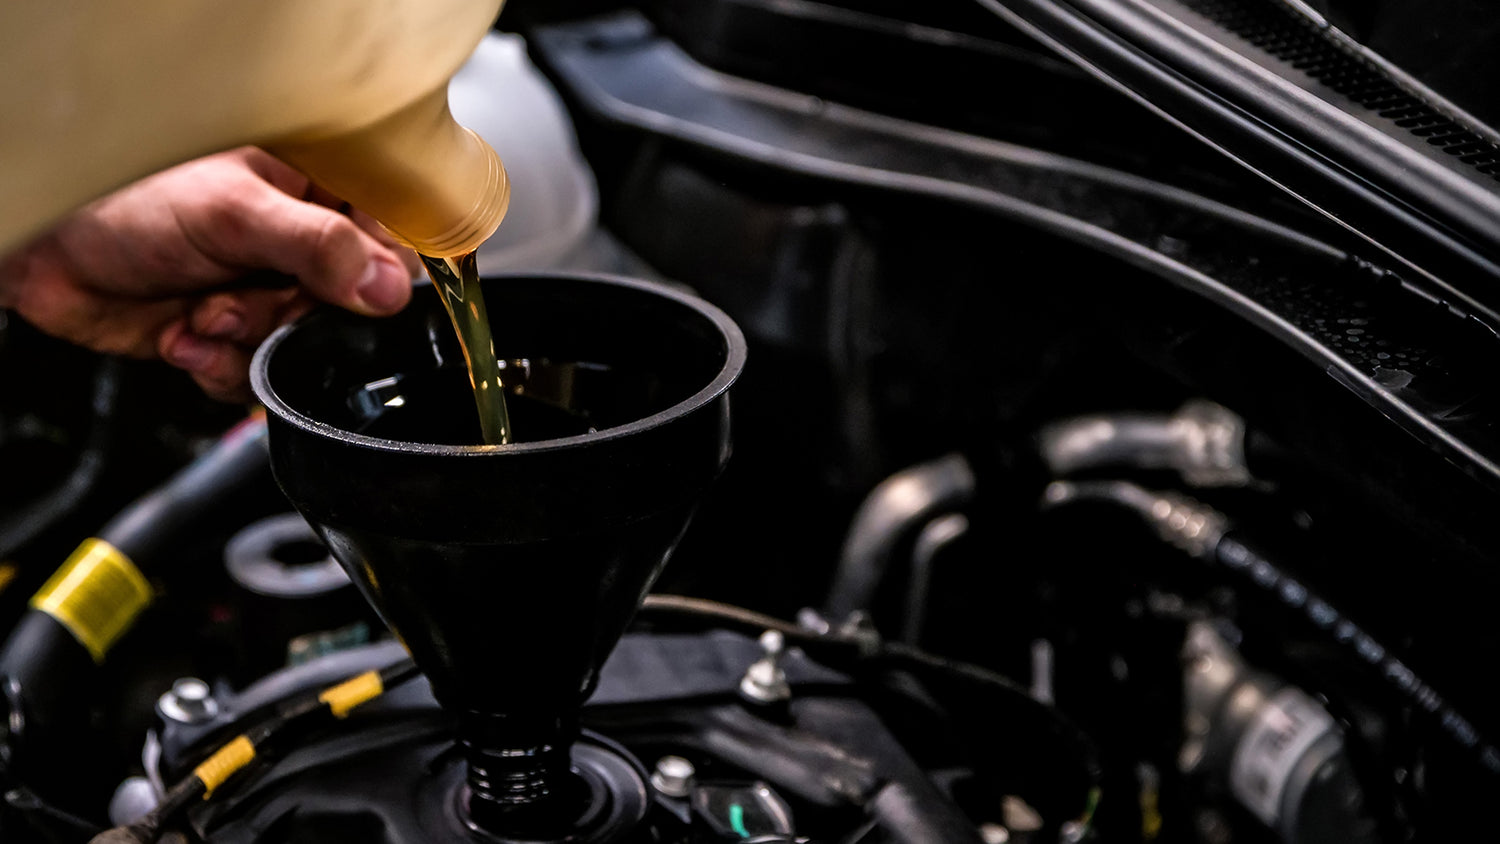 How to Change Oil: A Guide to Do It Yourself